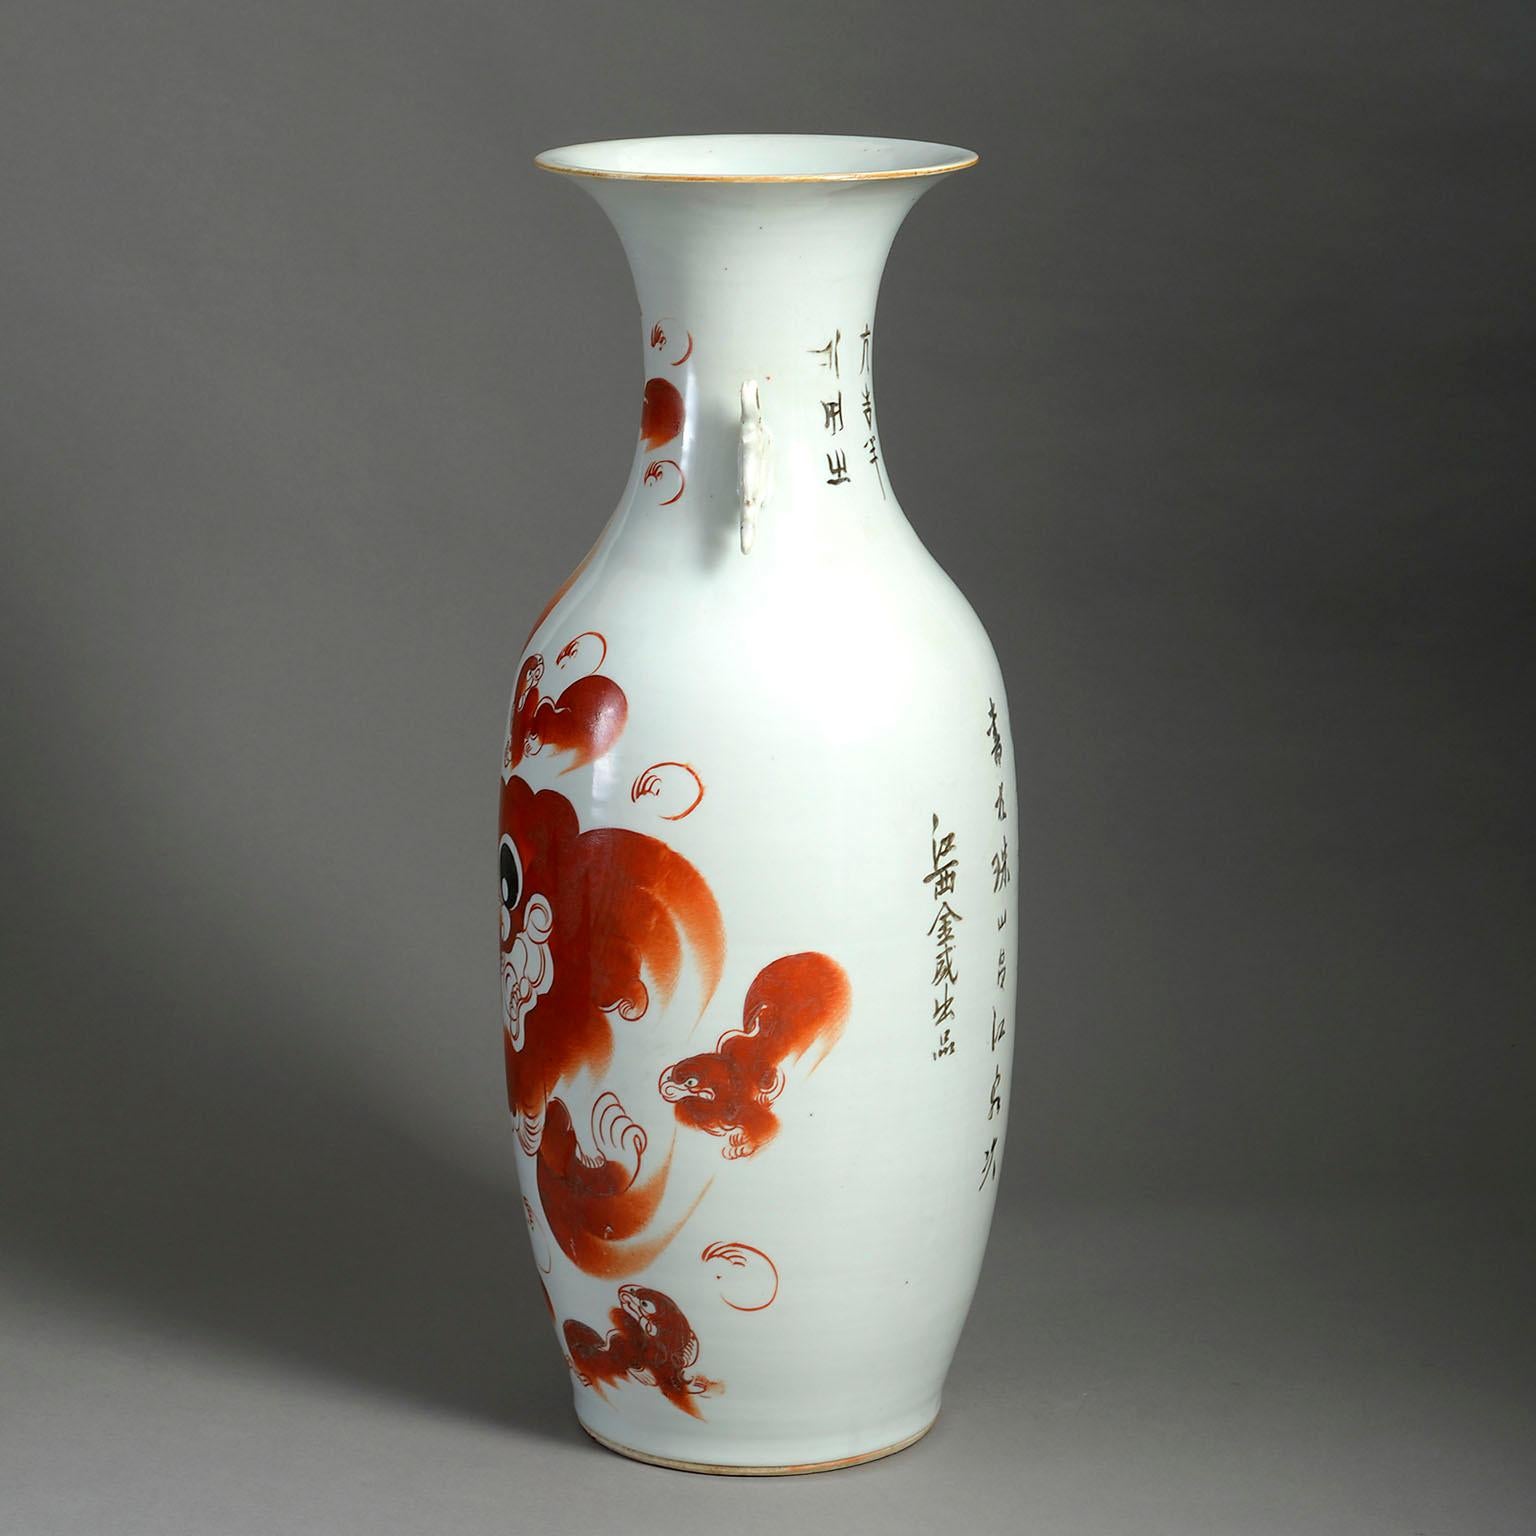 A twentieth century Republic Period porcelain foo dog vase of good scale, decorated with bright red glazes upon a white ground, with character marks verso.

Circa 1920 China

Dimensions: 9 W x 9 D x 23 H inches
23 W x 23 D x 58.5 H cm.